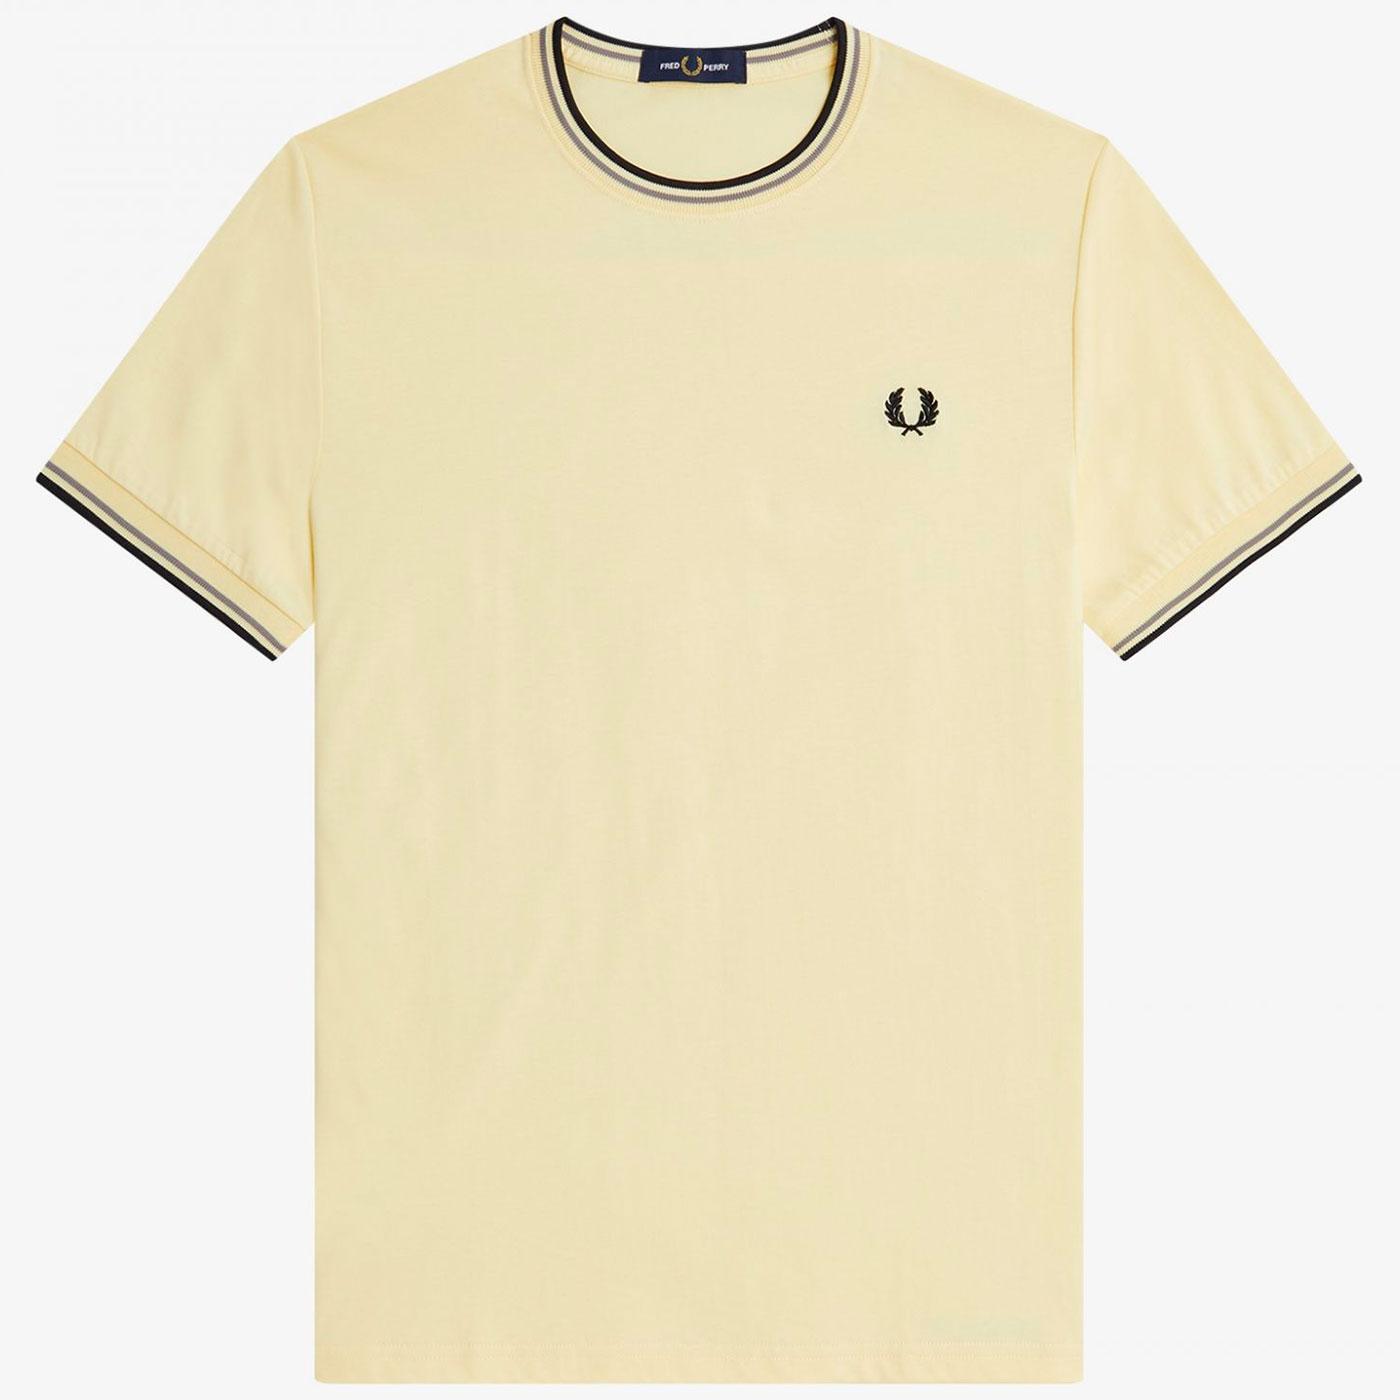 M1588 Fred Perry Twin Tipped Mod T-shirt Ice Cream